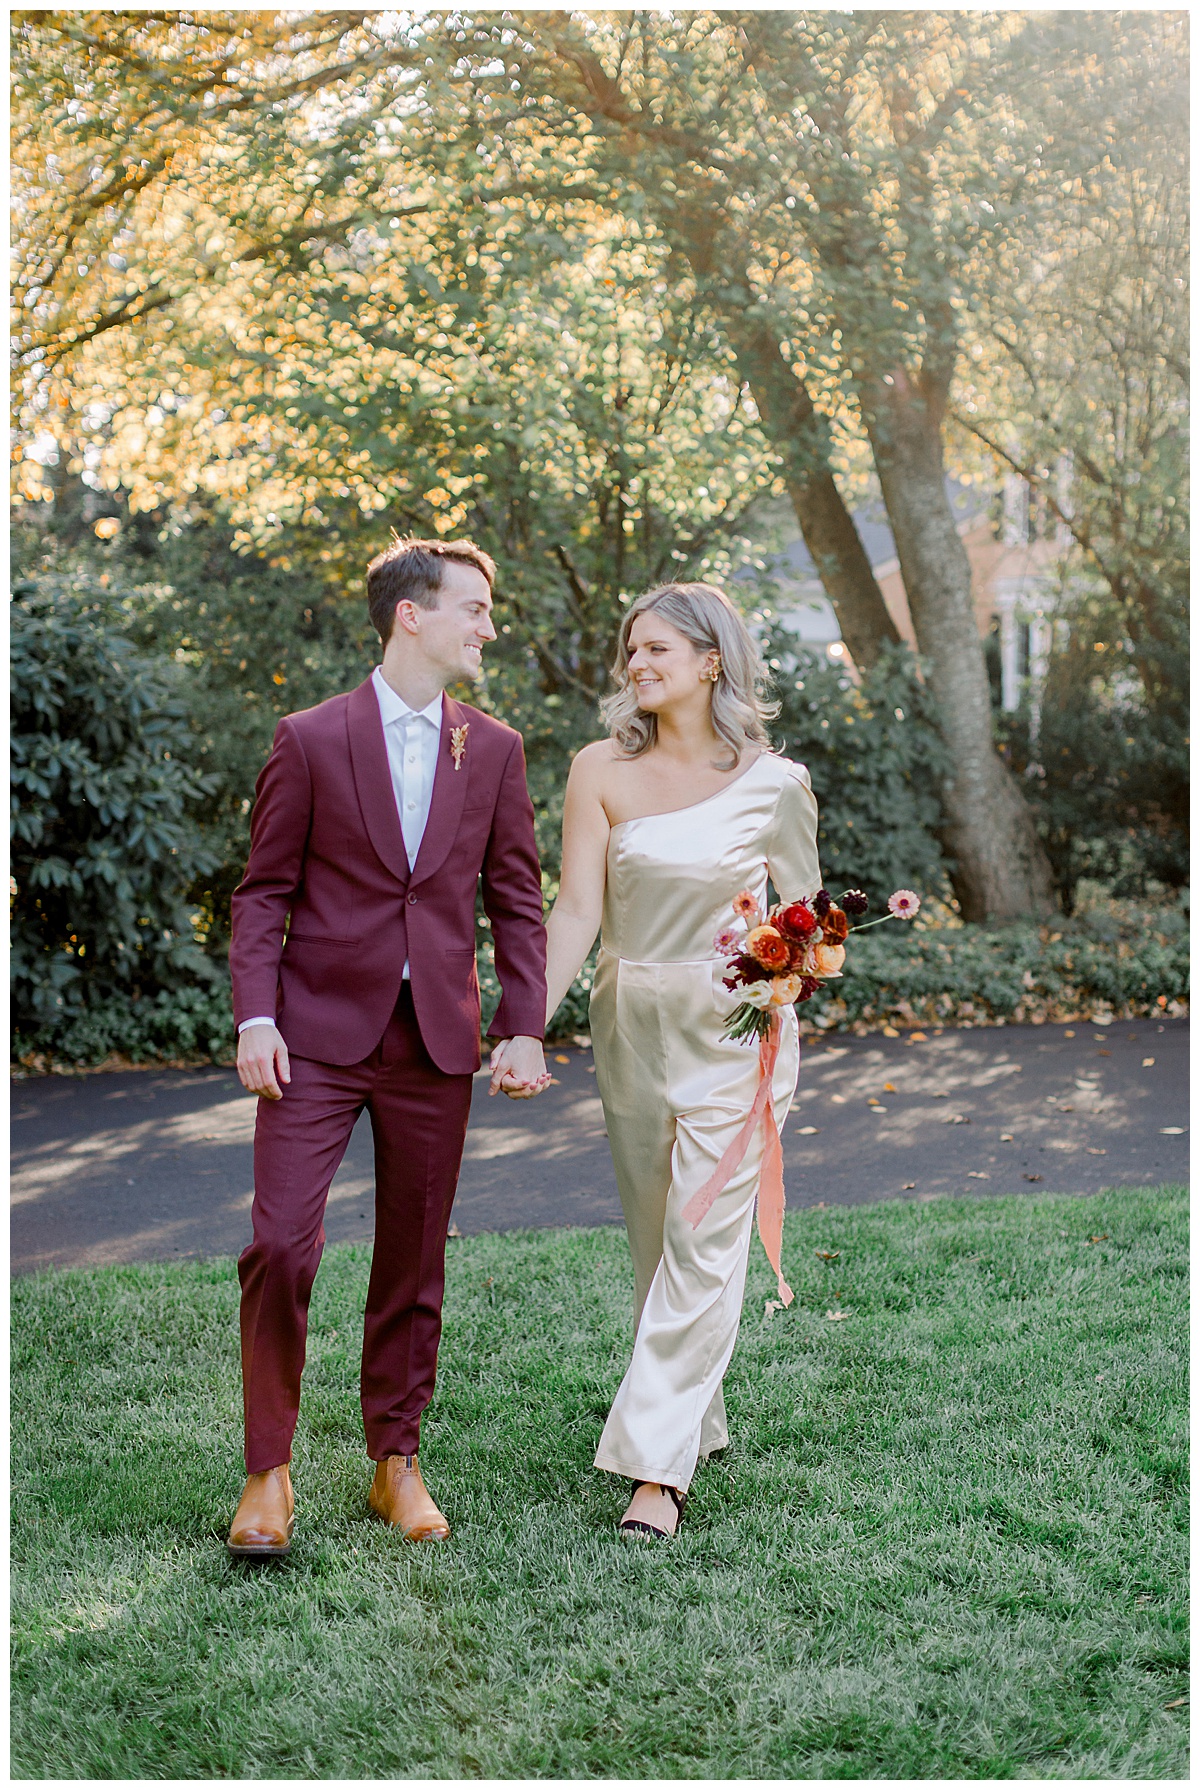 Margot and Johnny - A Charleston Covid Elopement | Candice Adelle Photography - Charleston Elopement Photographer_0070.jpg